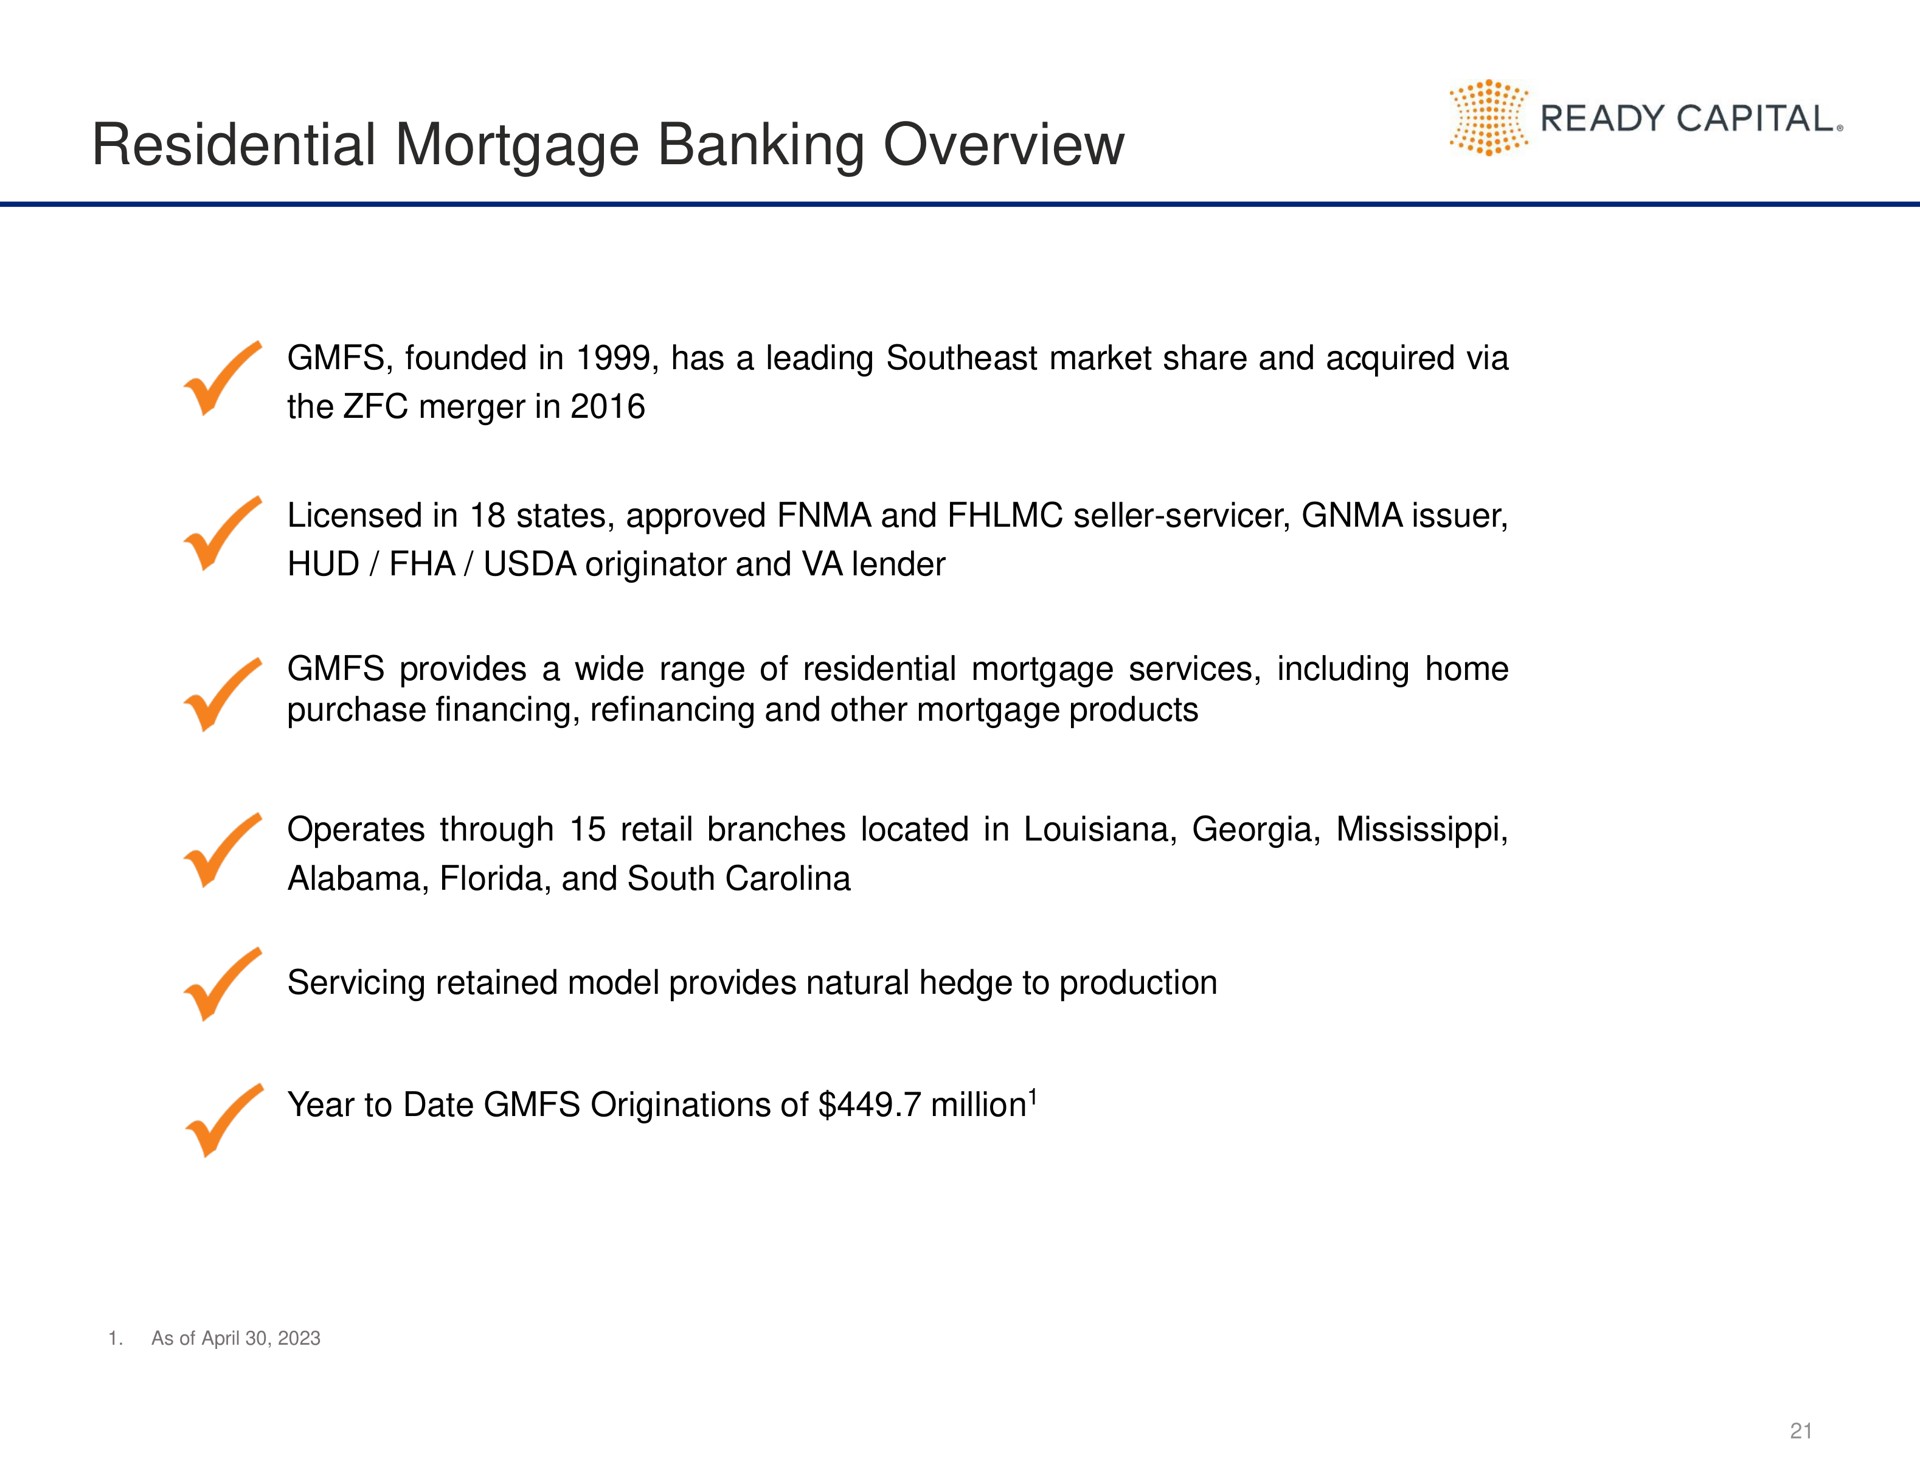 residential mortgage banking overview bead capital | Ready Capital